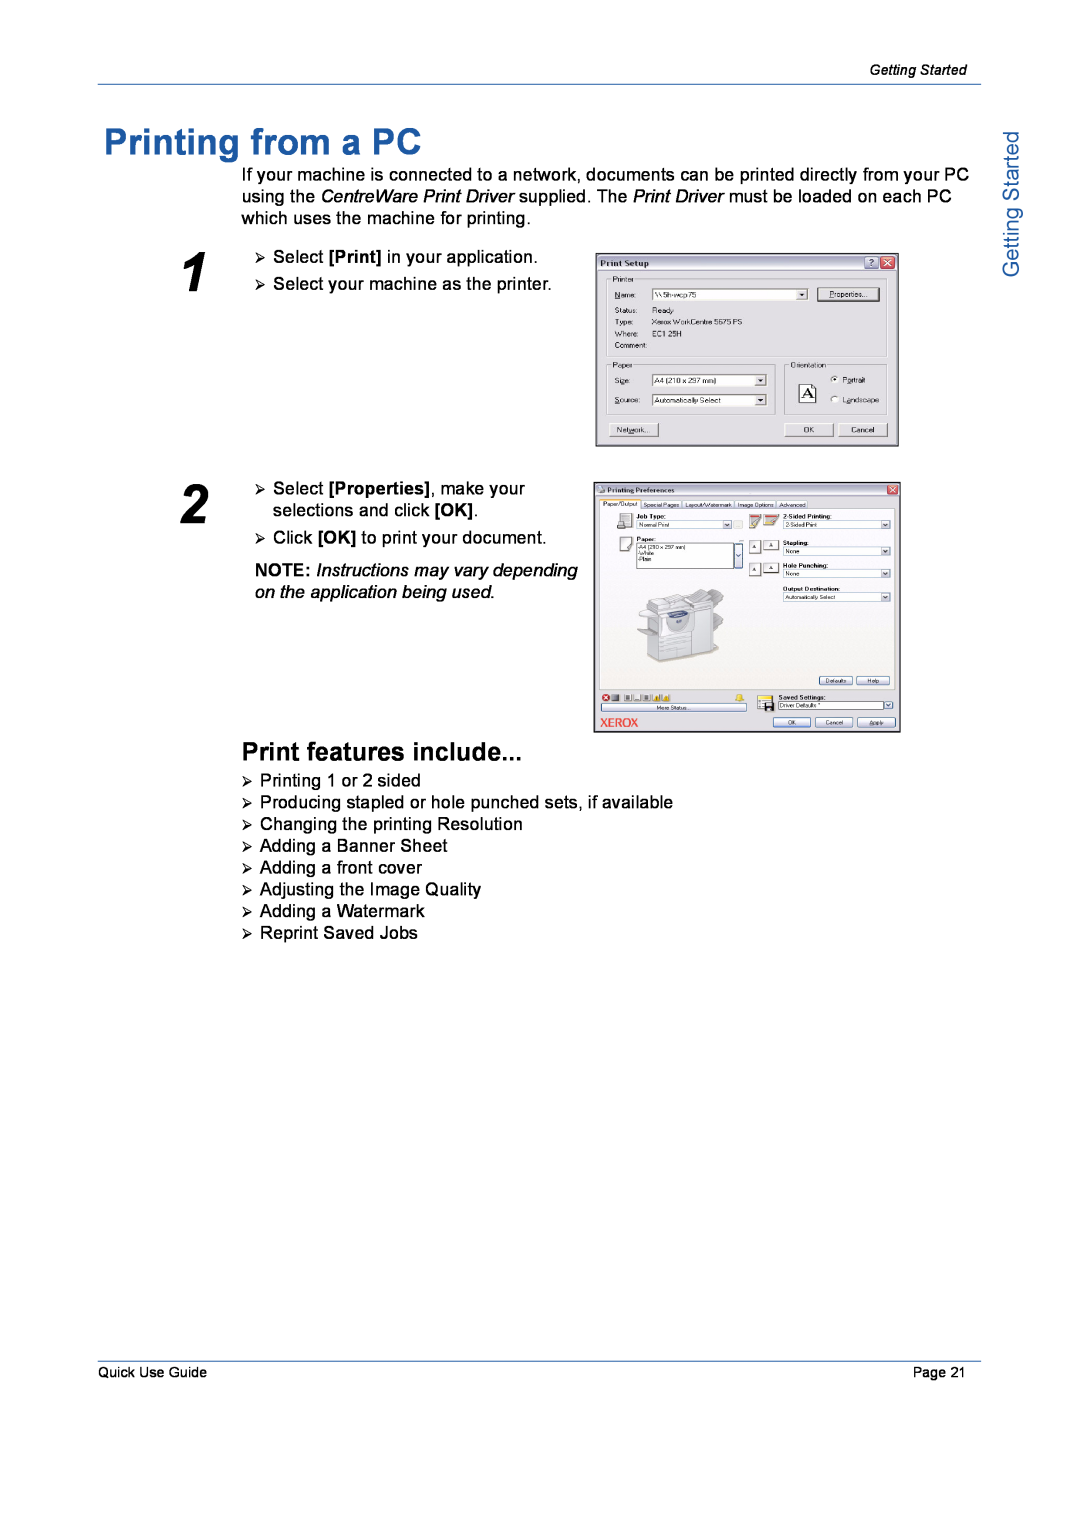 Xerox 5632 manual Printing from a PC, Print features include, Getting Started 